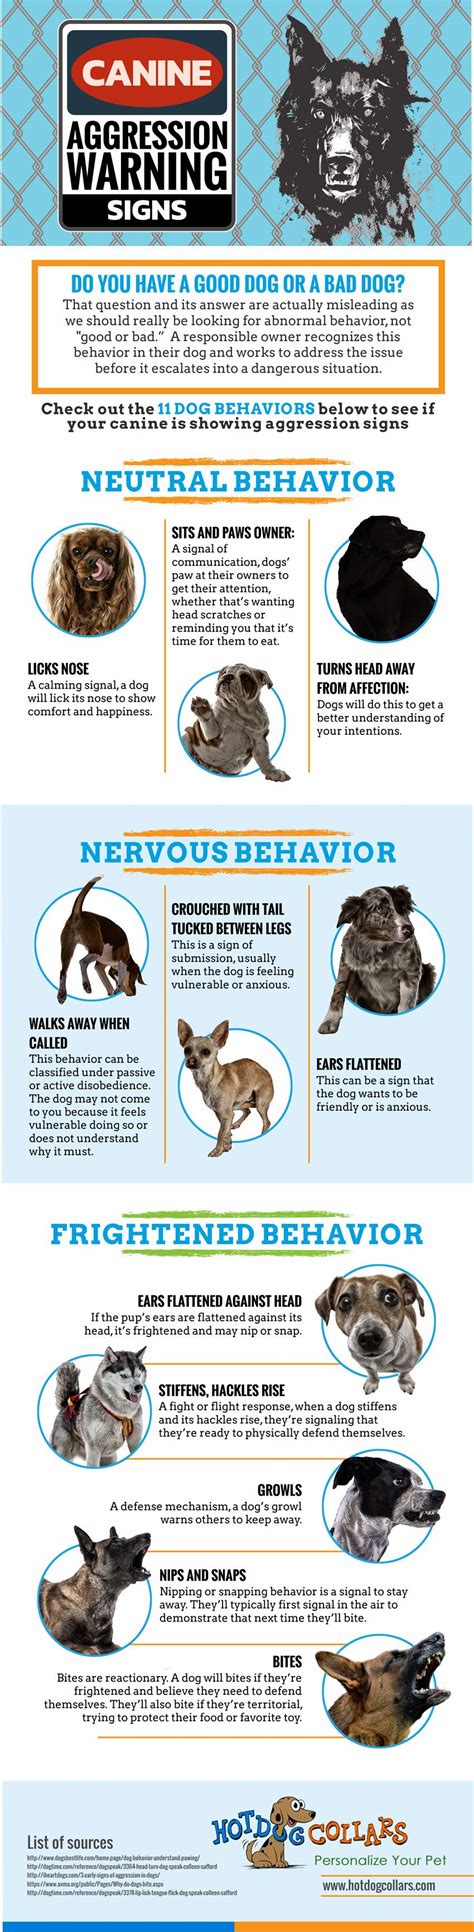 Infographic Top Canine Aggression Warning Signs